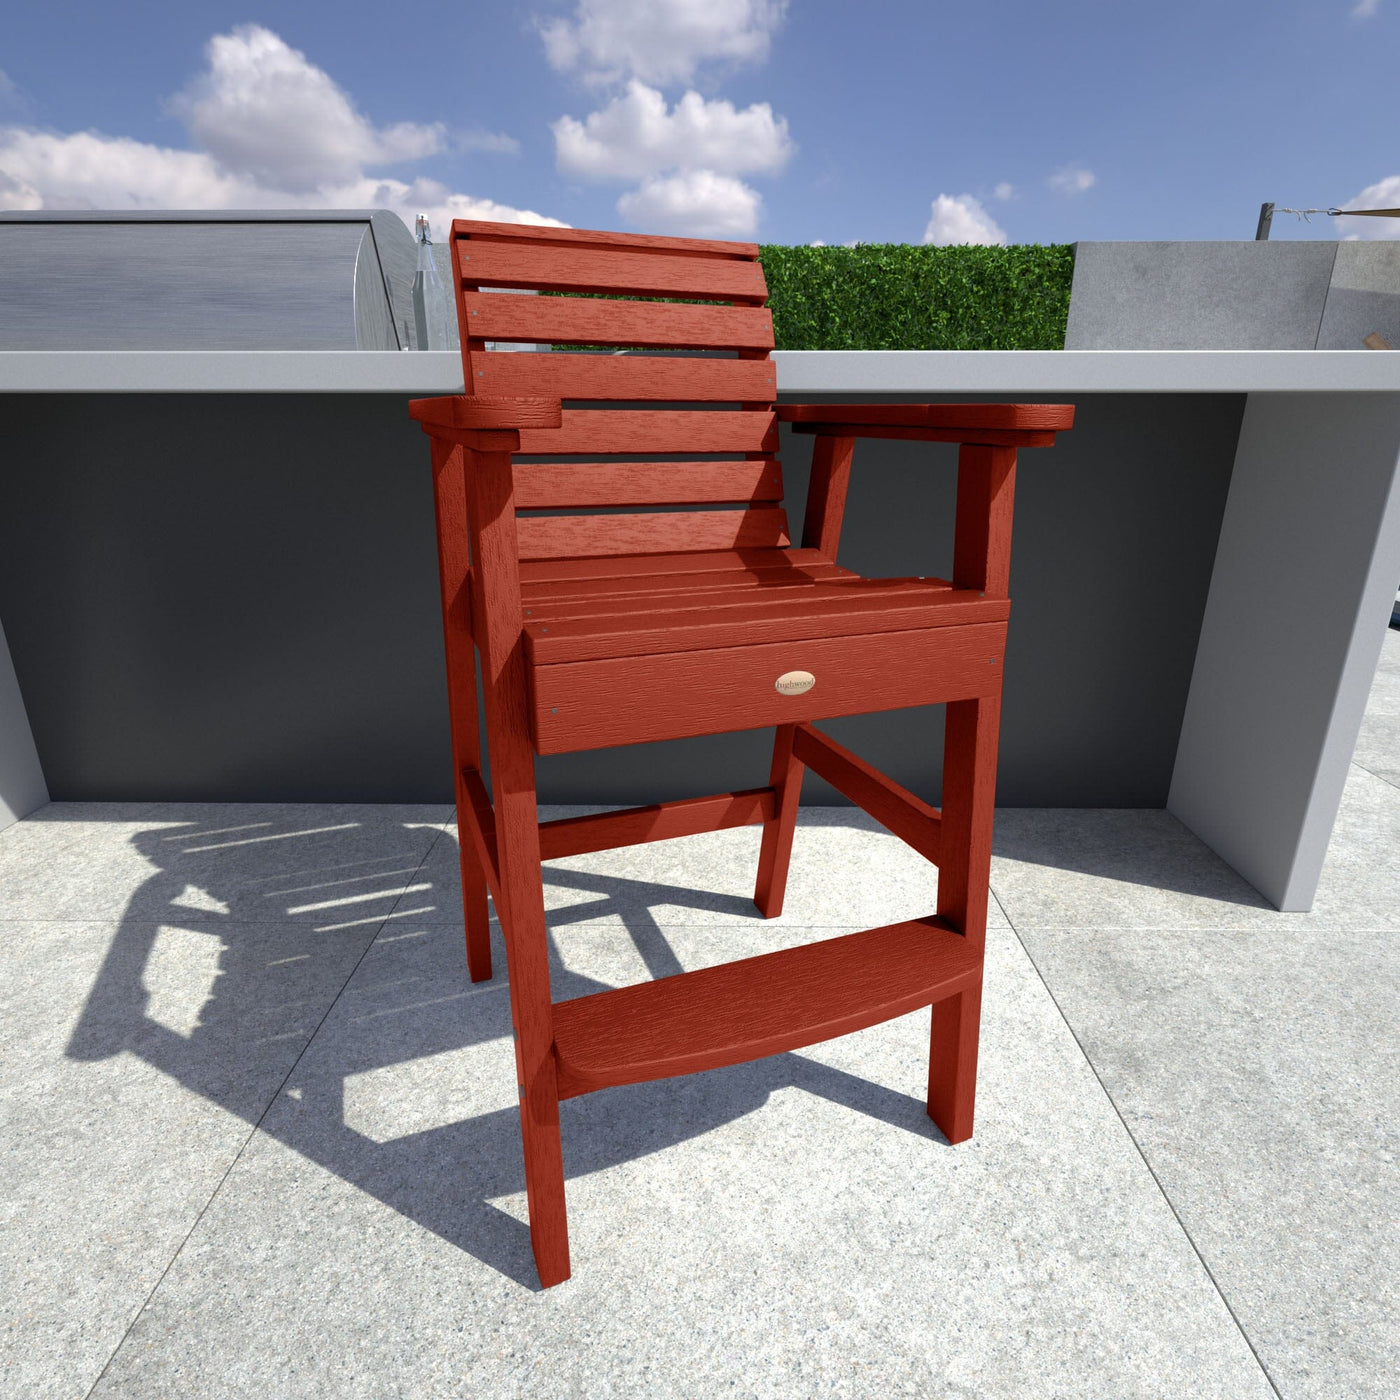 Red Weatherly Bar Height Chair in outdoor kitchen